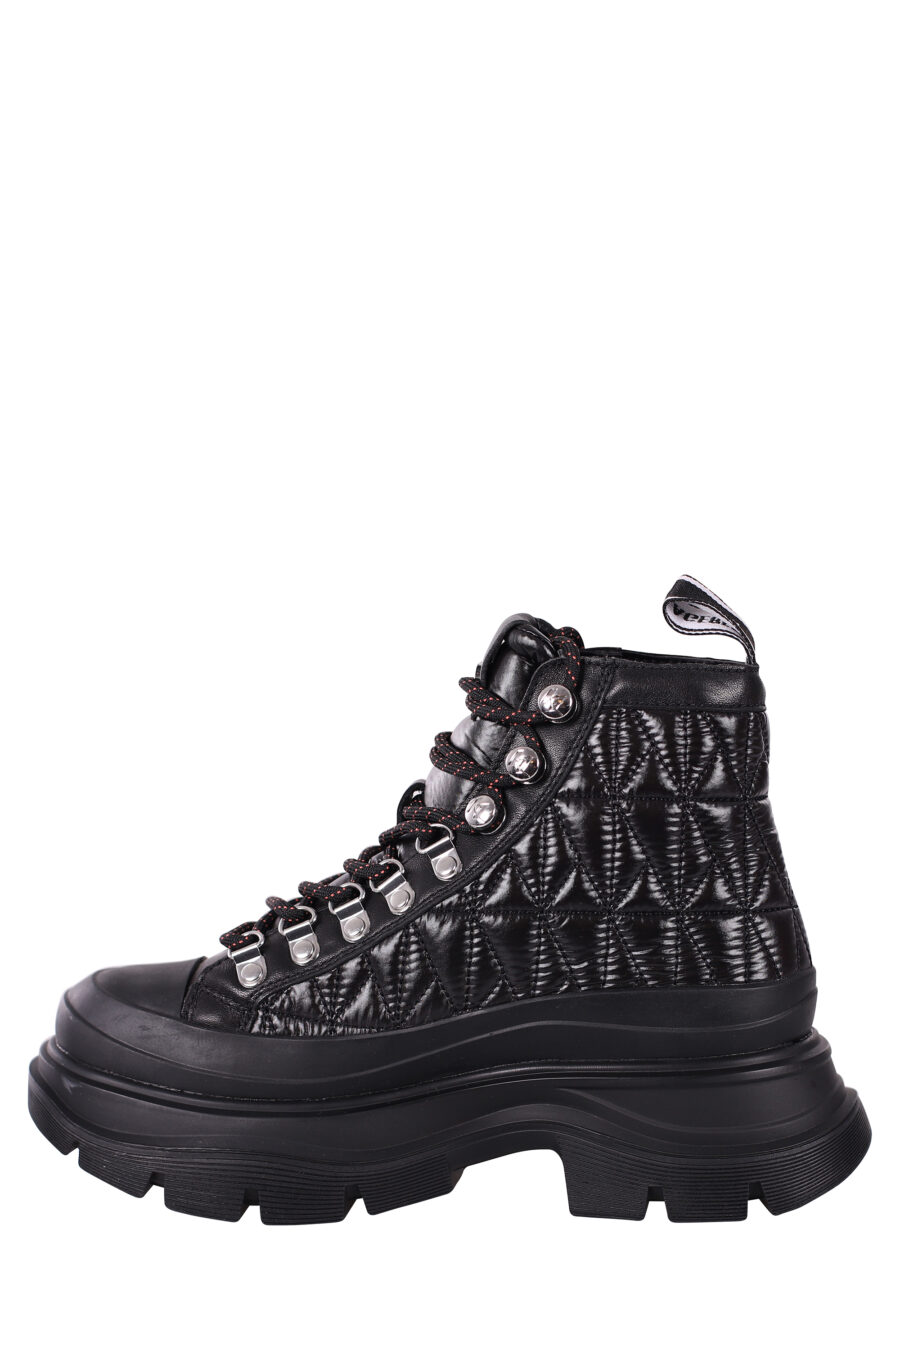 Black ankle boots with silver monogram logo and laces - IMG 5806